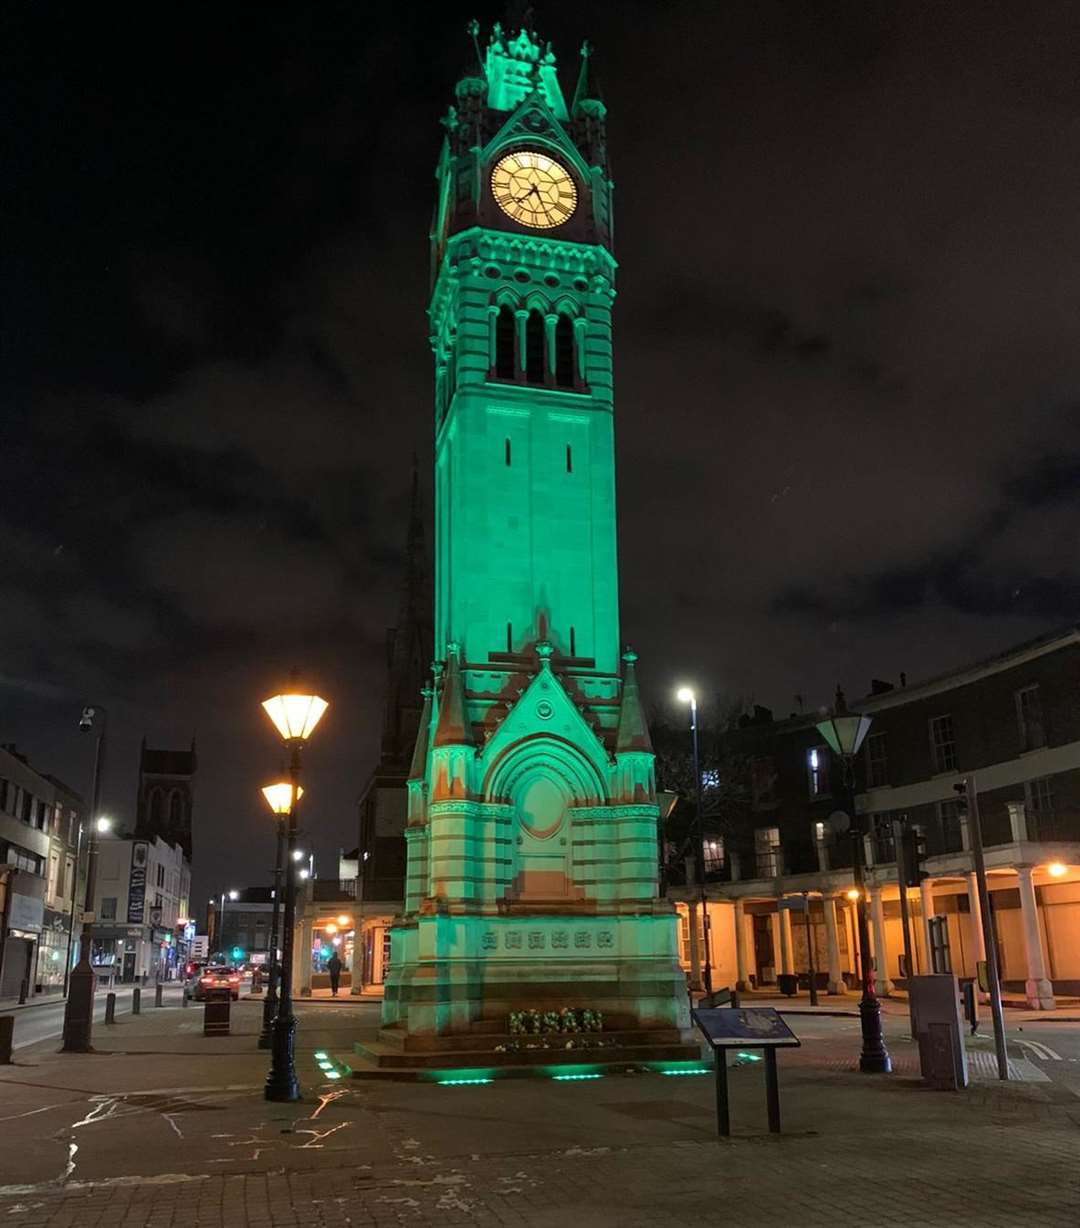 Gravesend's Clock Tower was lit up green in a show of solidarity with farmers protesting laws in India